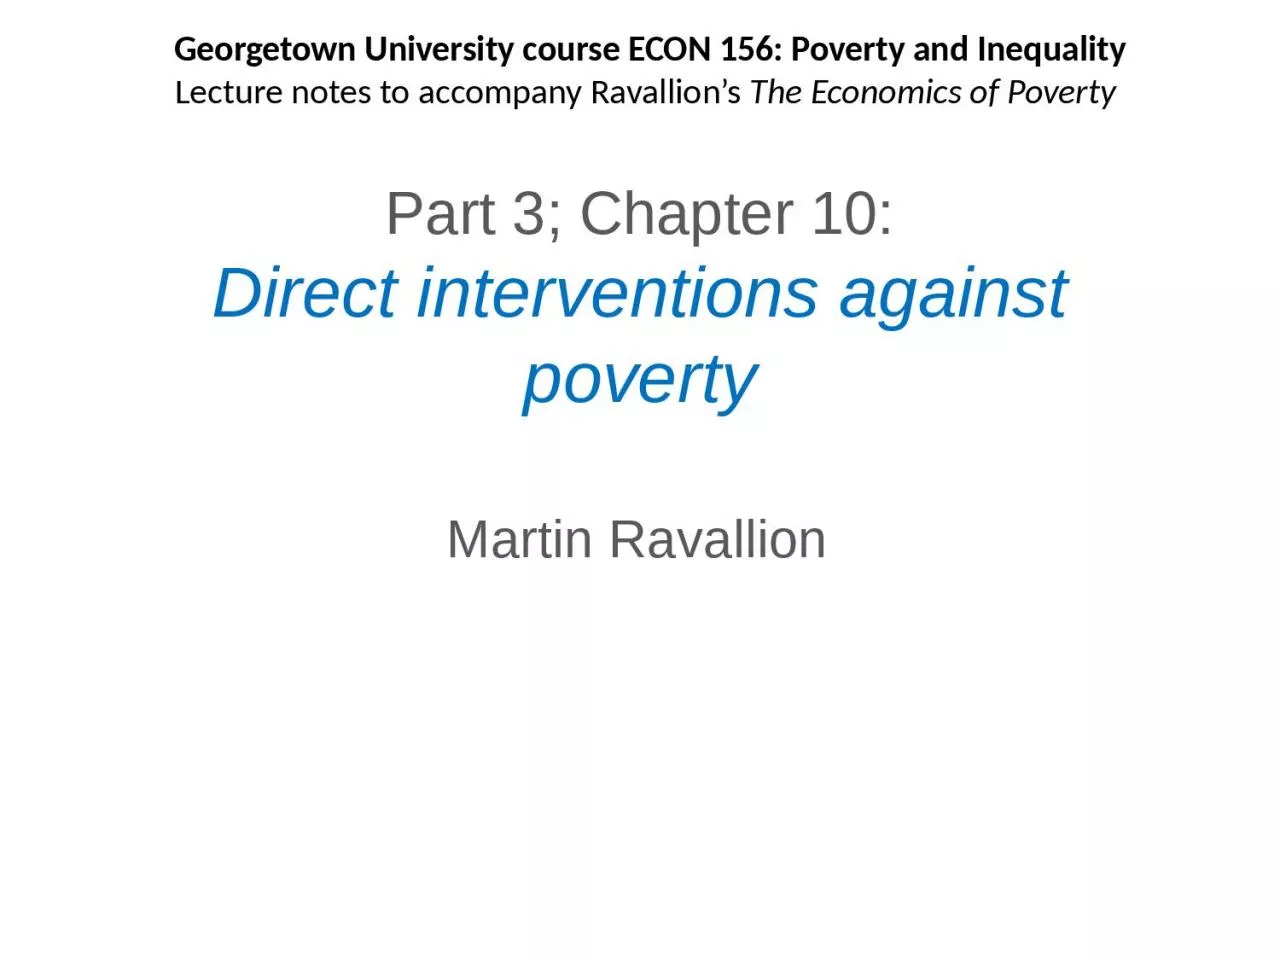 Part 3; Chapter 10: Direct interventions against poverty